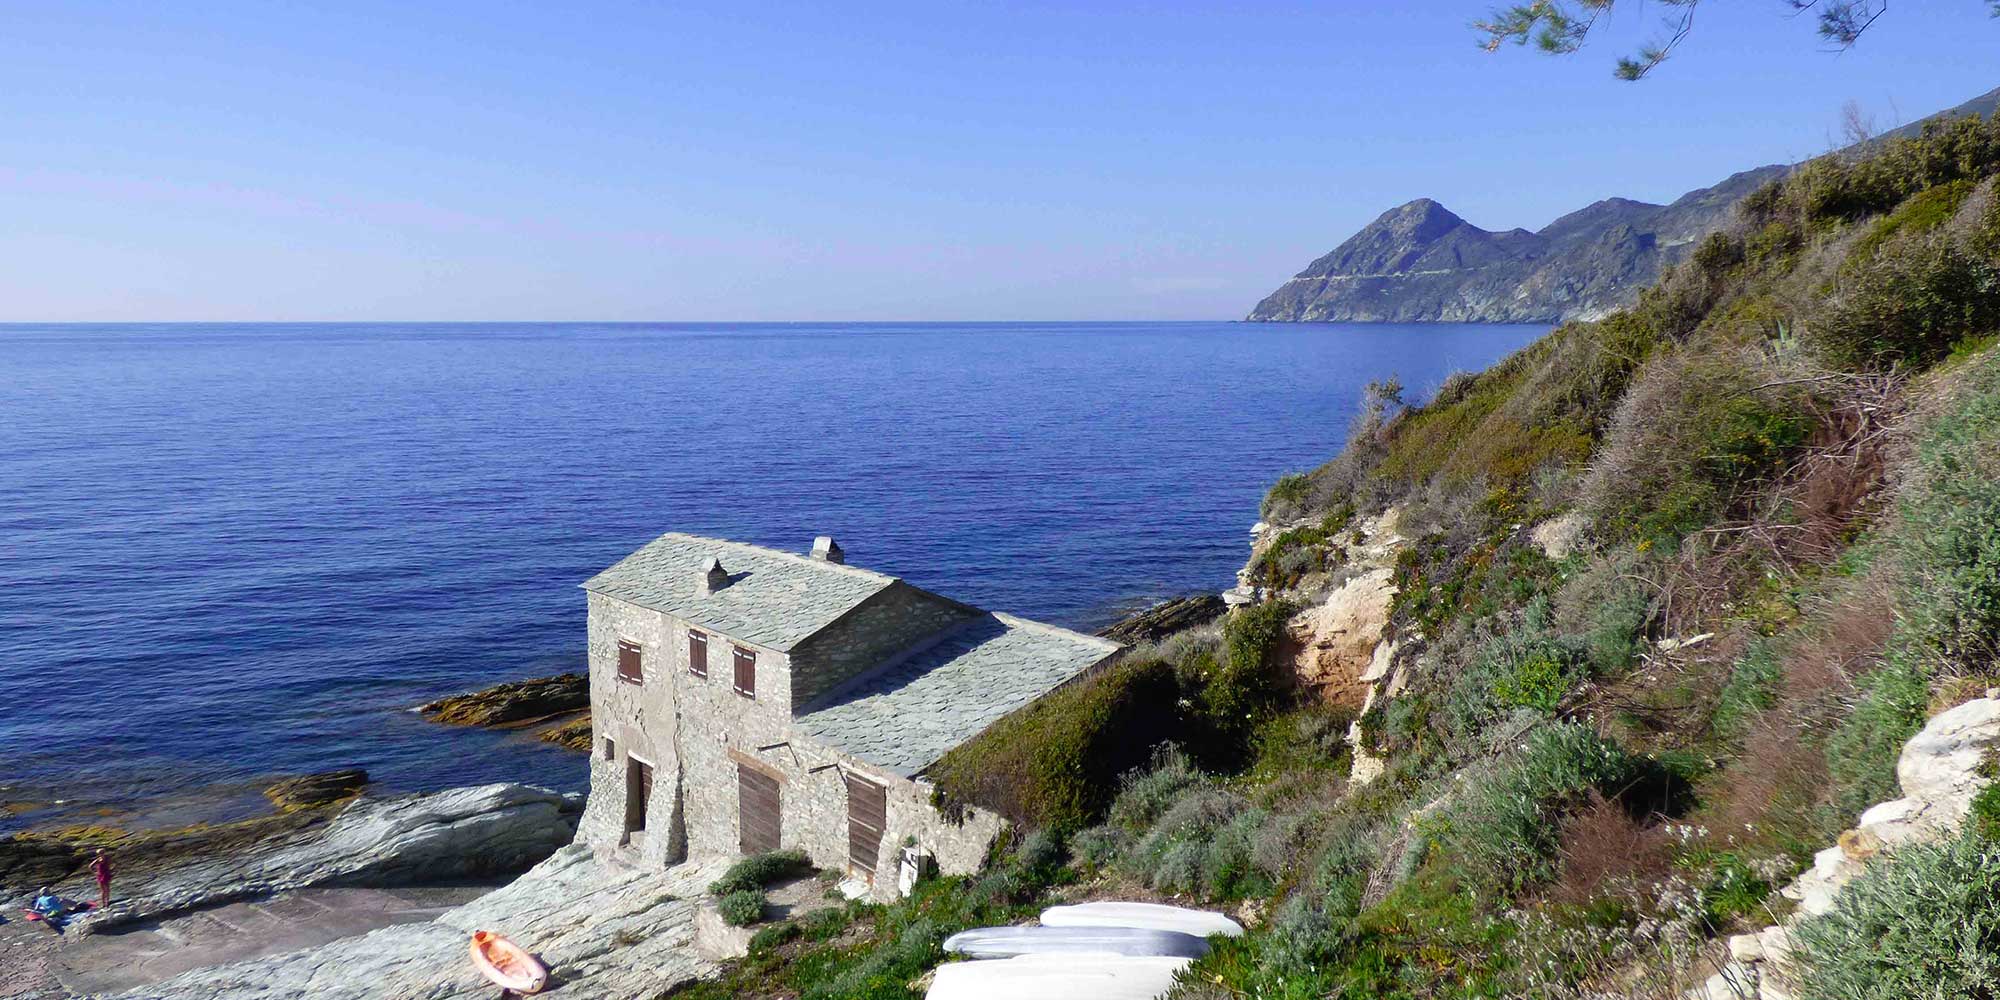 Canari is a charming village of Cap Corse with some traders